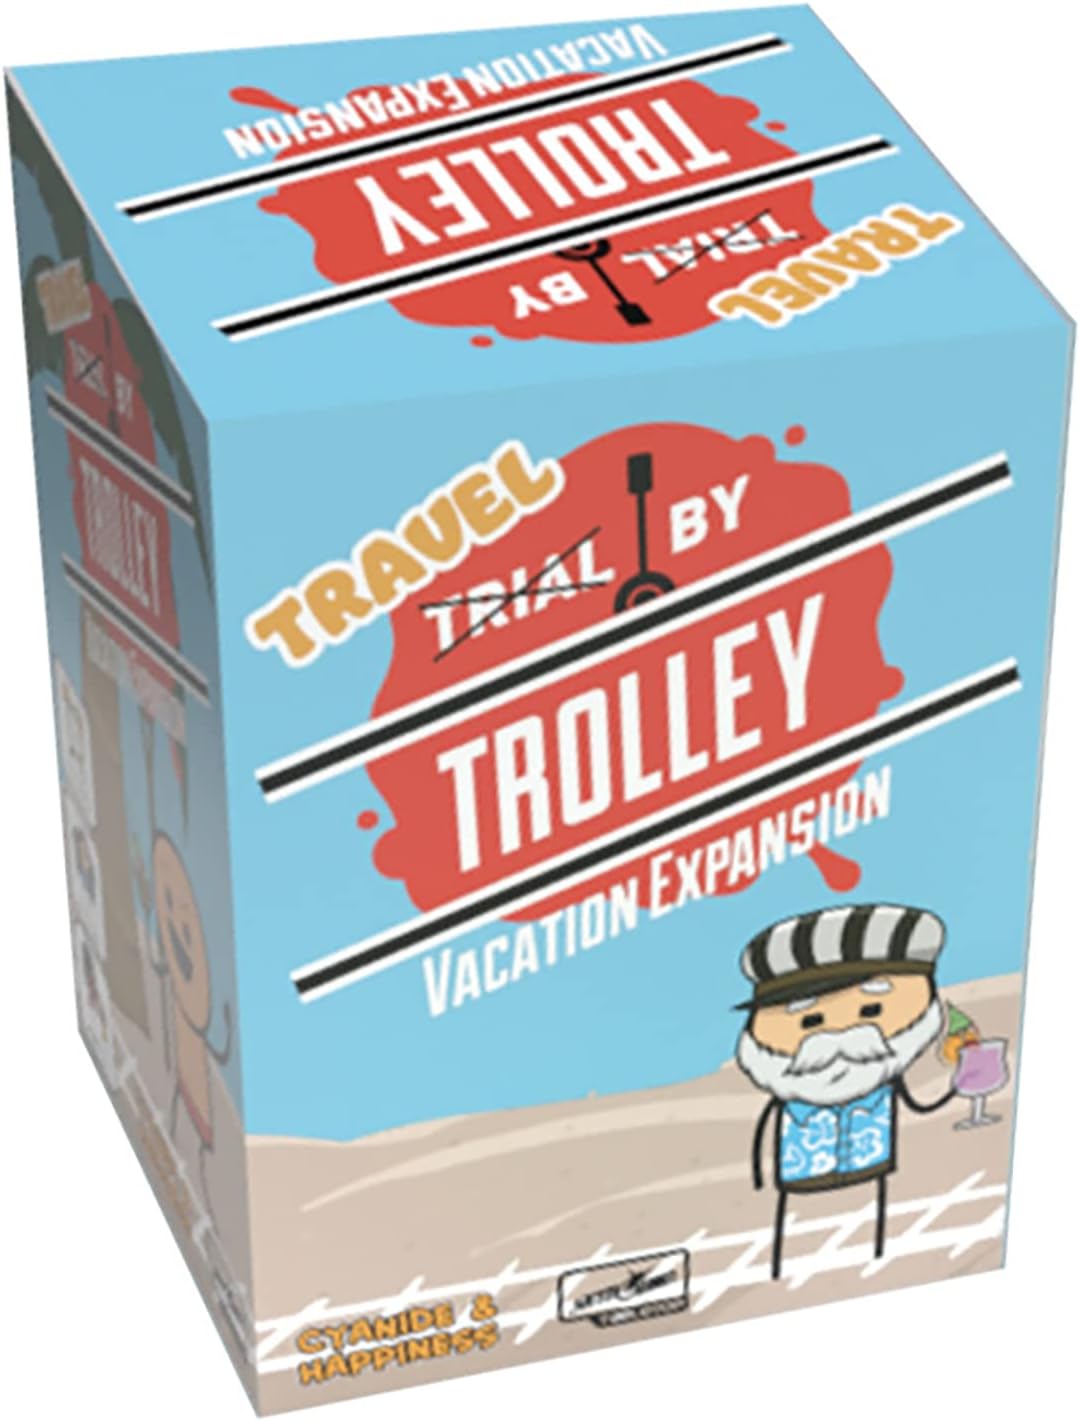 Trial By Trolley: Vacation Expansion